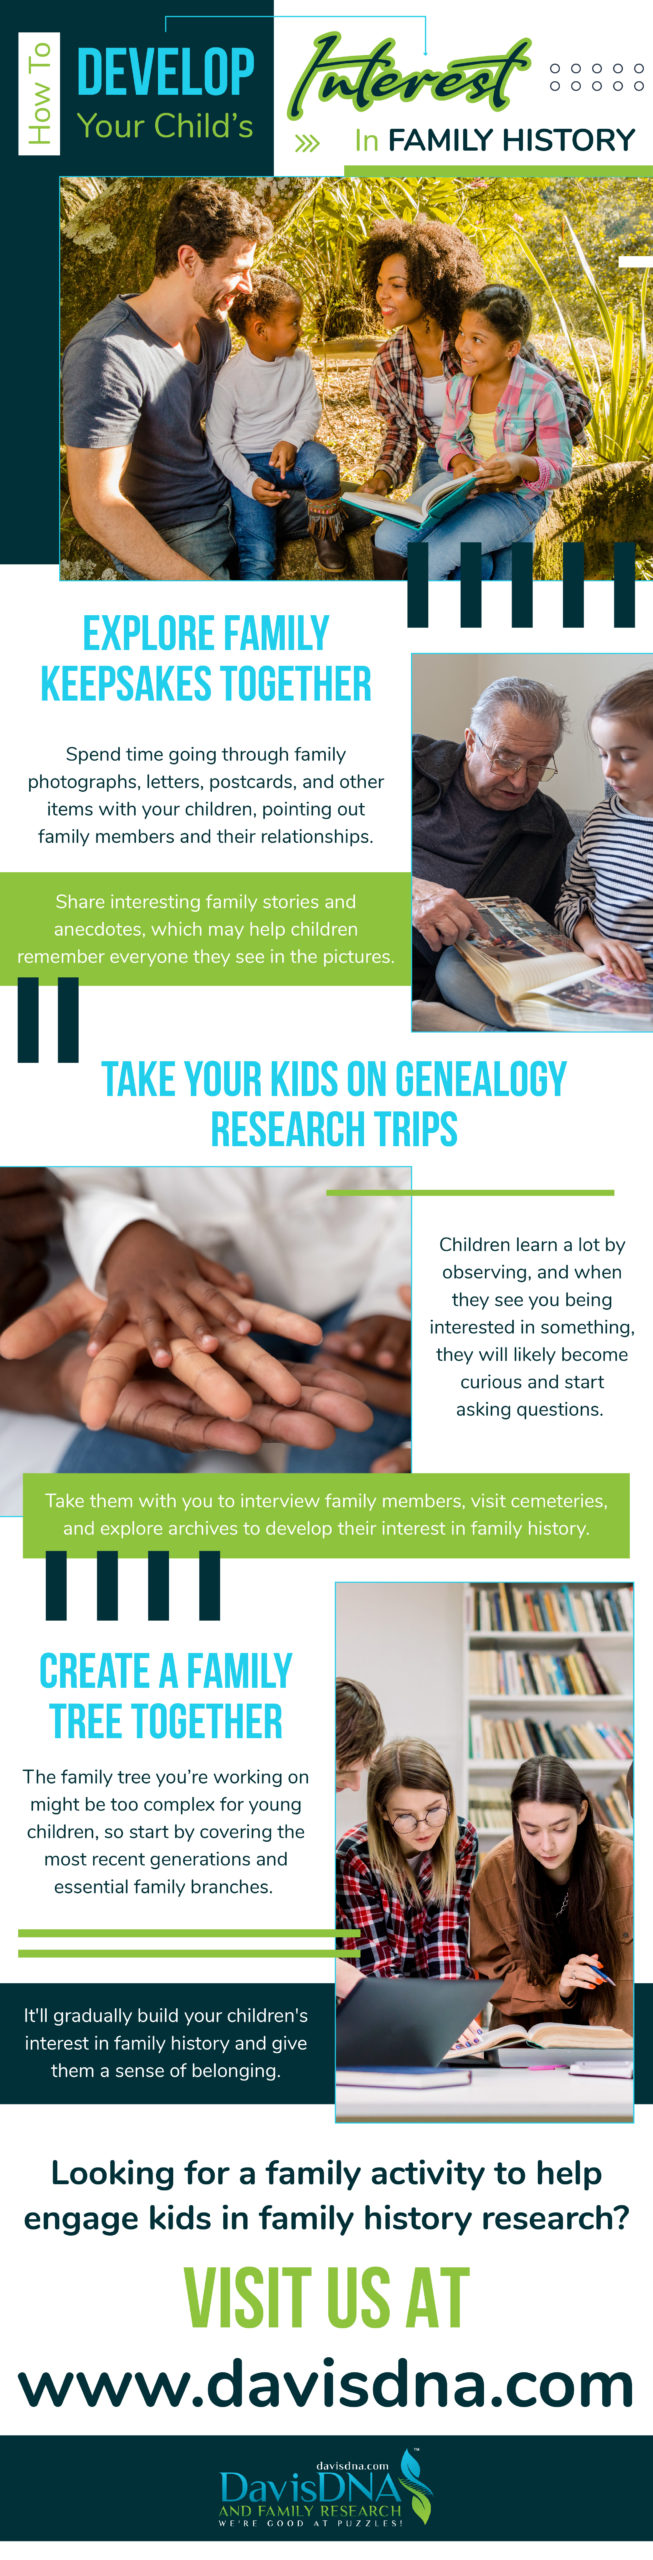 How to Develop Your Child's Interest in Family History